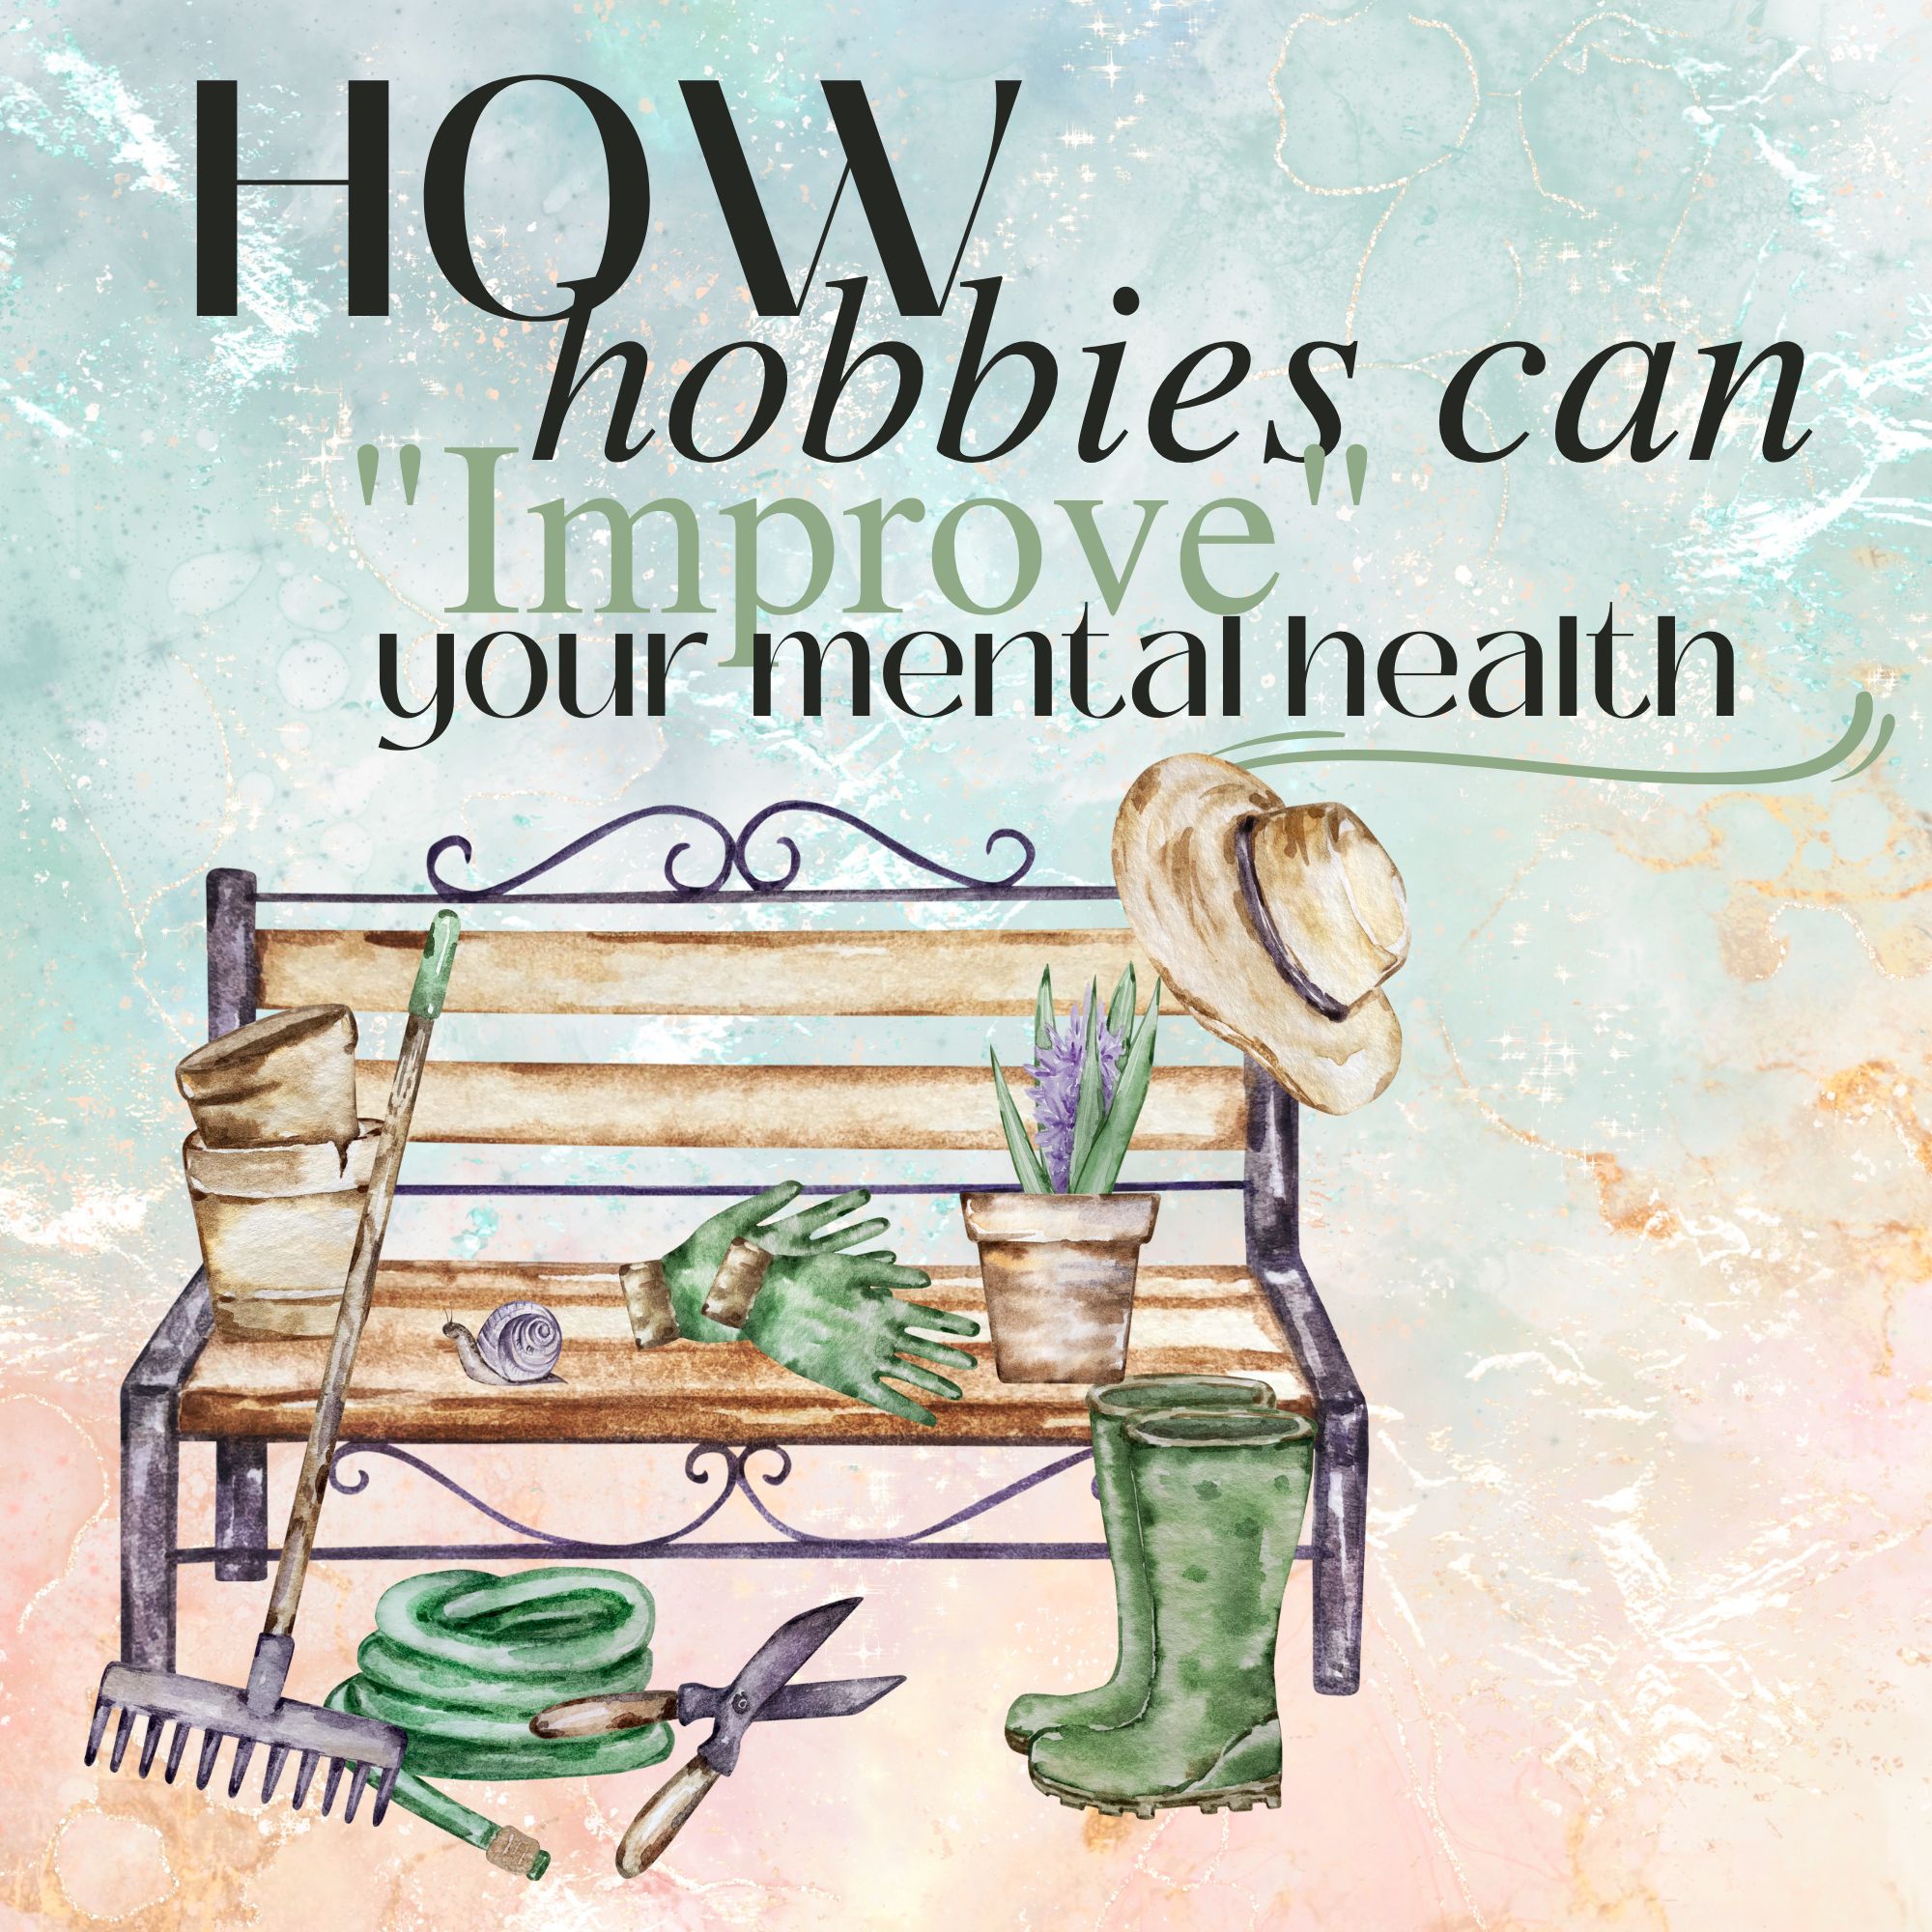 How Hobbies Can Improve Your Mental Health!